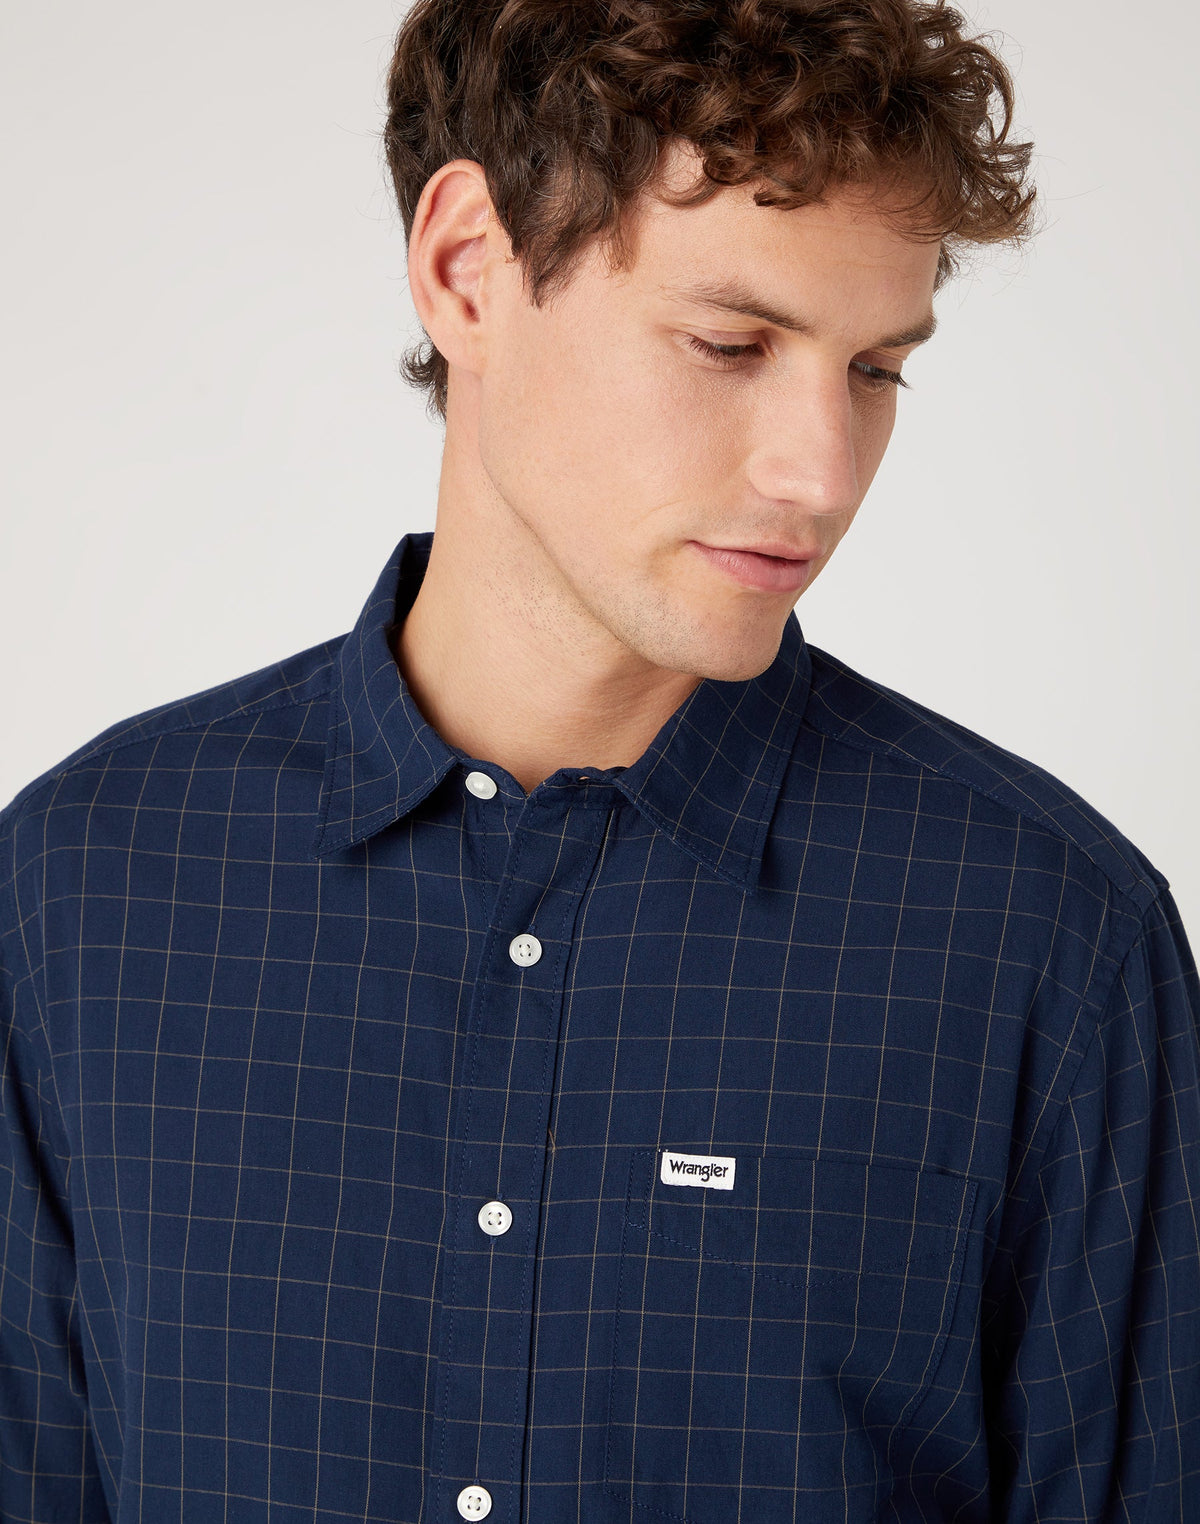 One Pocket Shirt in Eclipse